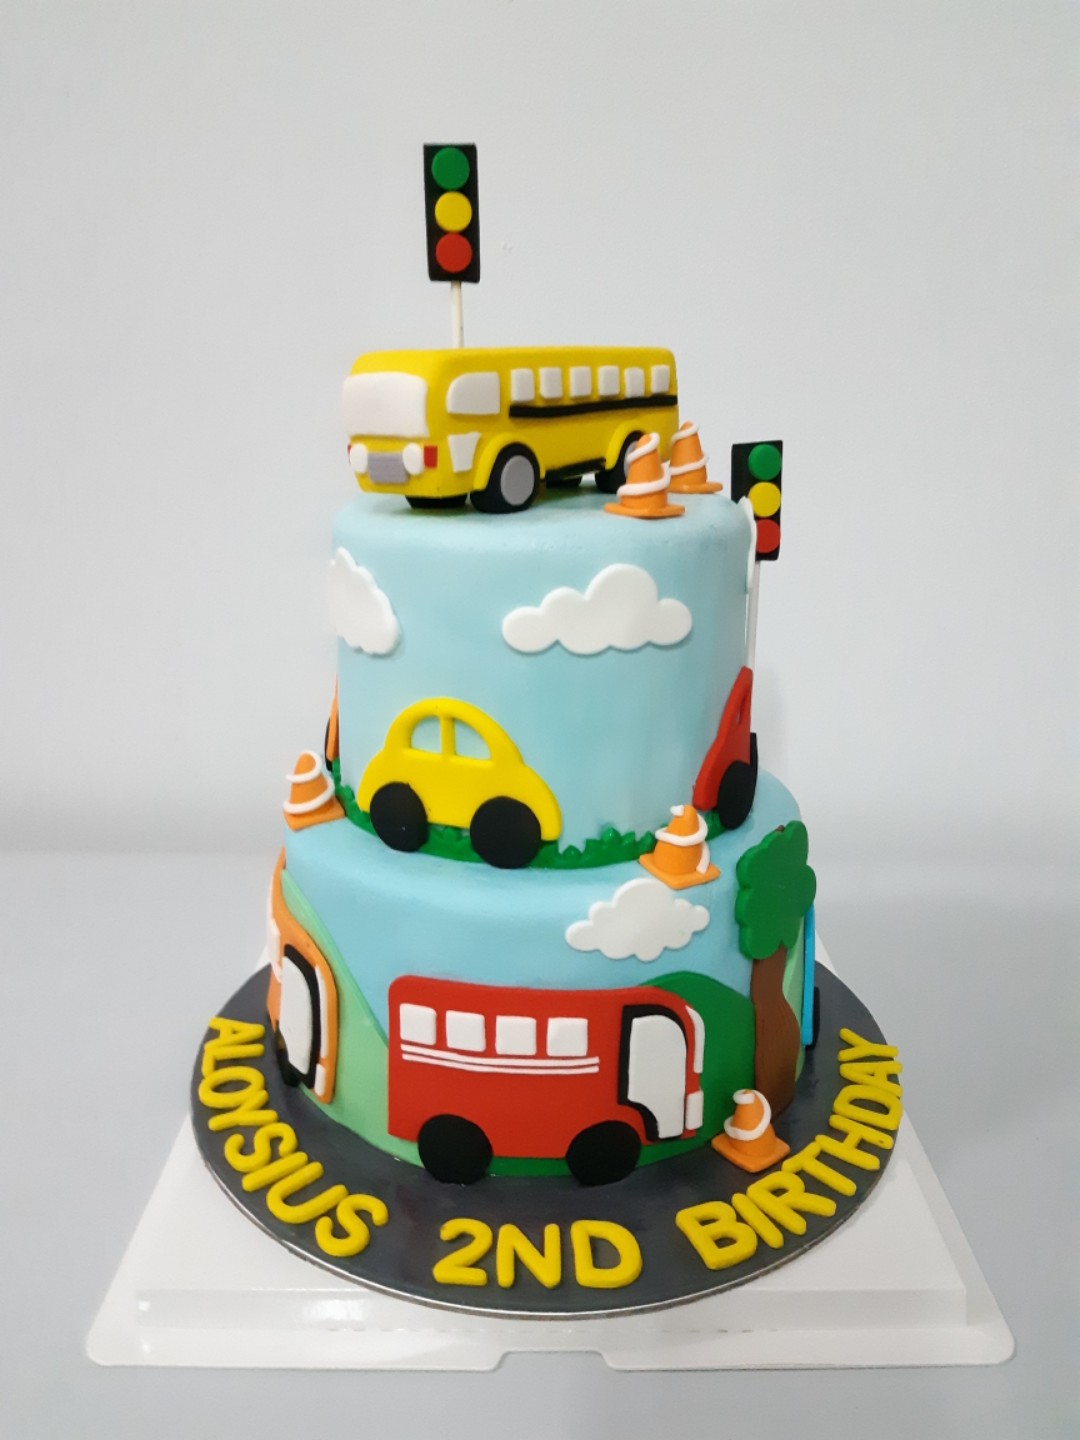 Transport Birthday Cakes | Cakes by Robin